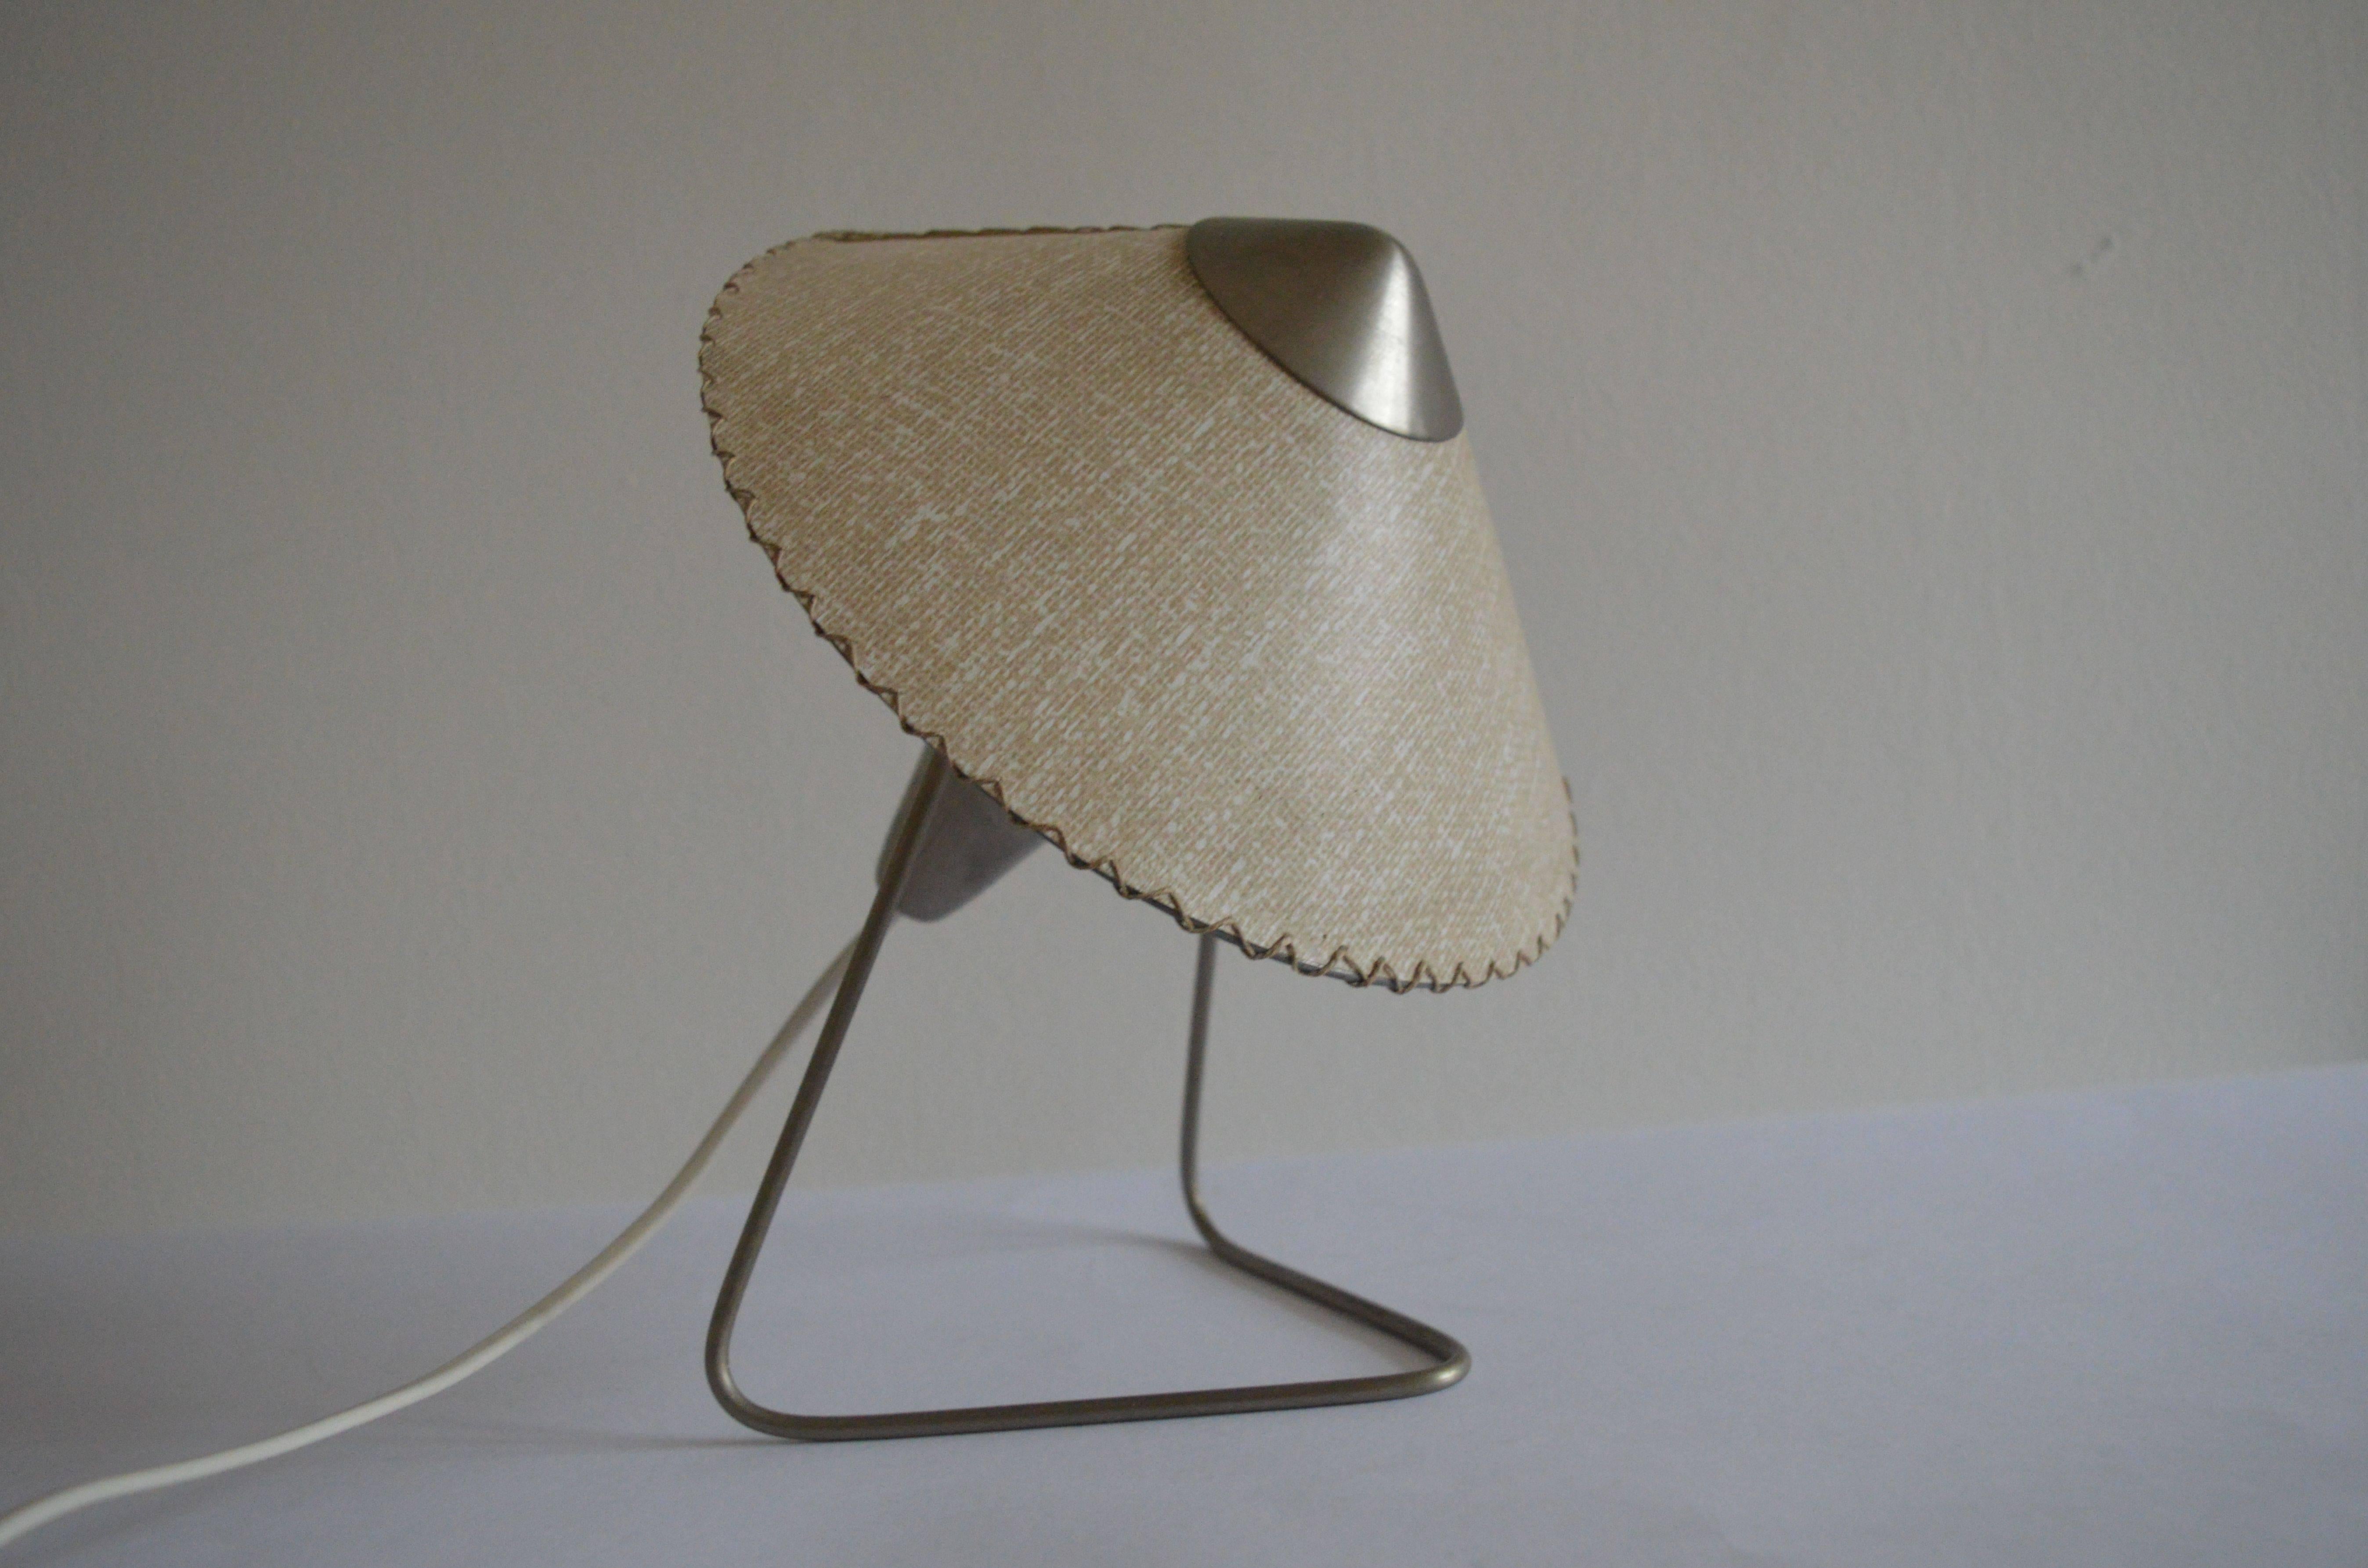 Designed by Helena Frantová for group of artists Okolo from Czech Republic. Maker Kovona n.p.
Usable as a wall lamp.